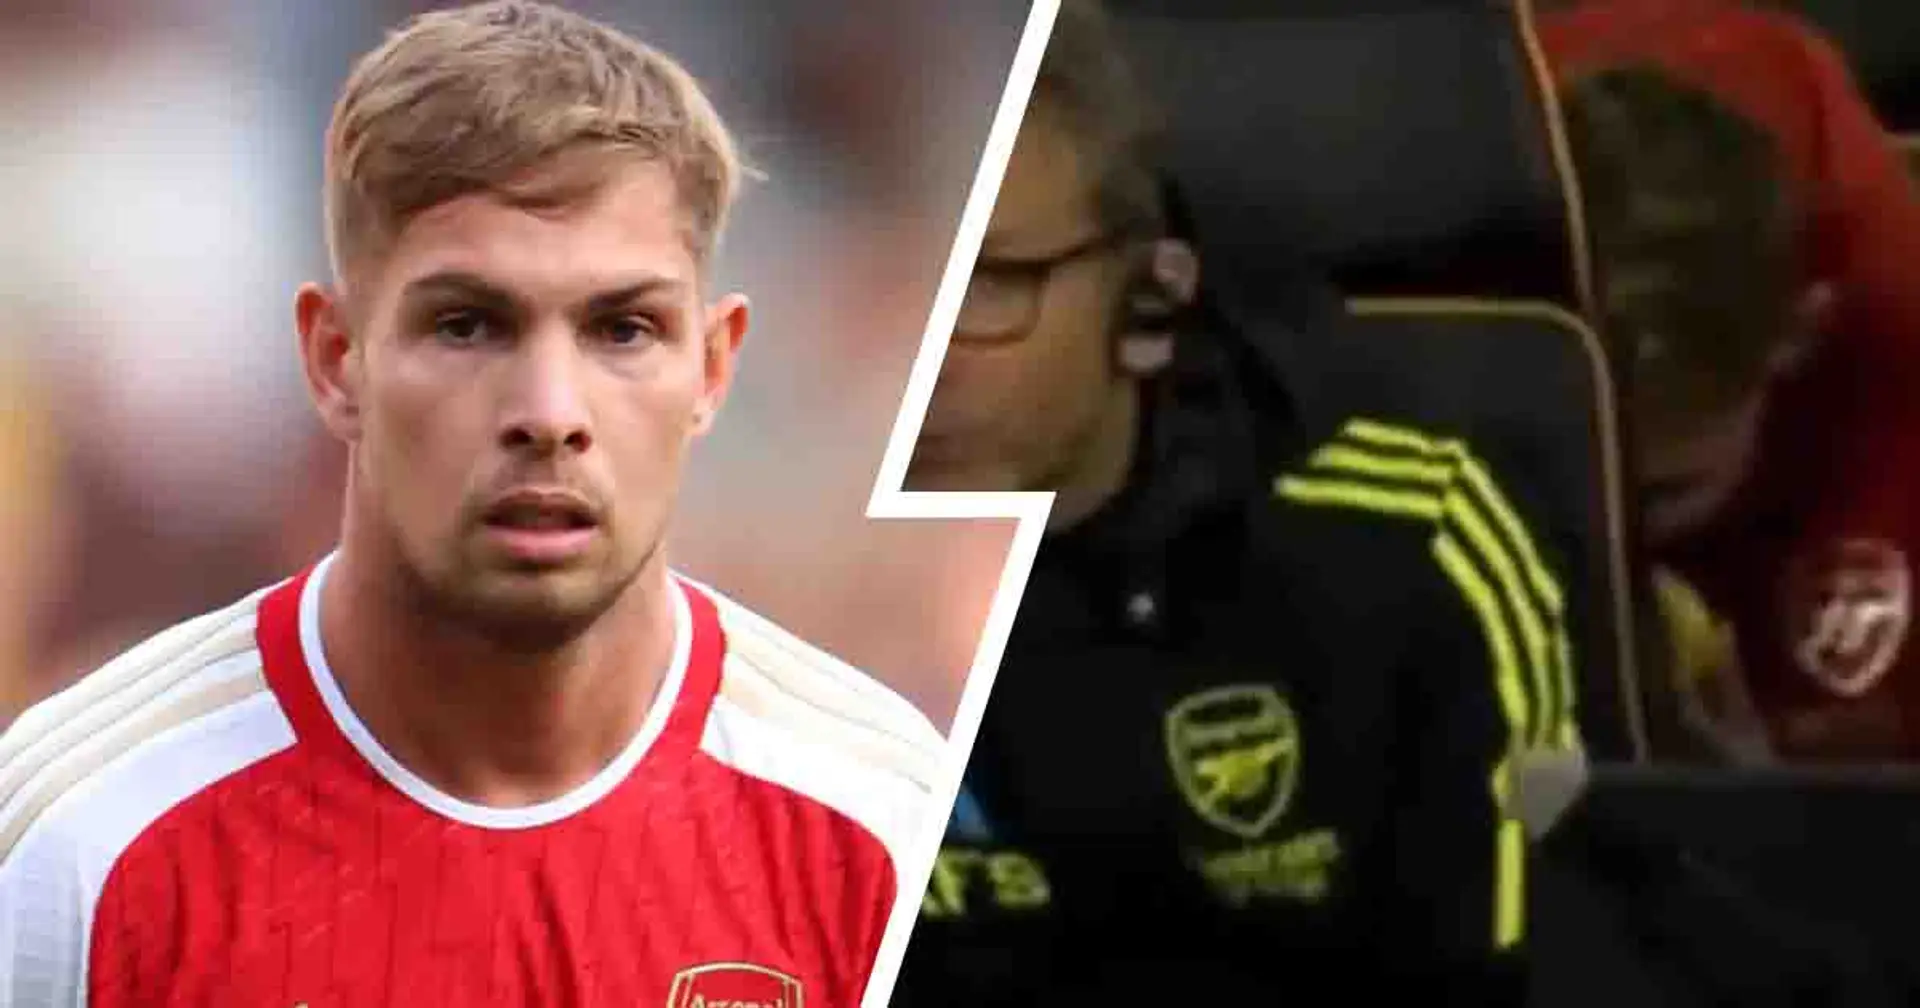 'He knows he's not being subbed': Arsenal fans react to Smith Rowe being caught eating burger vs Wolves